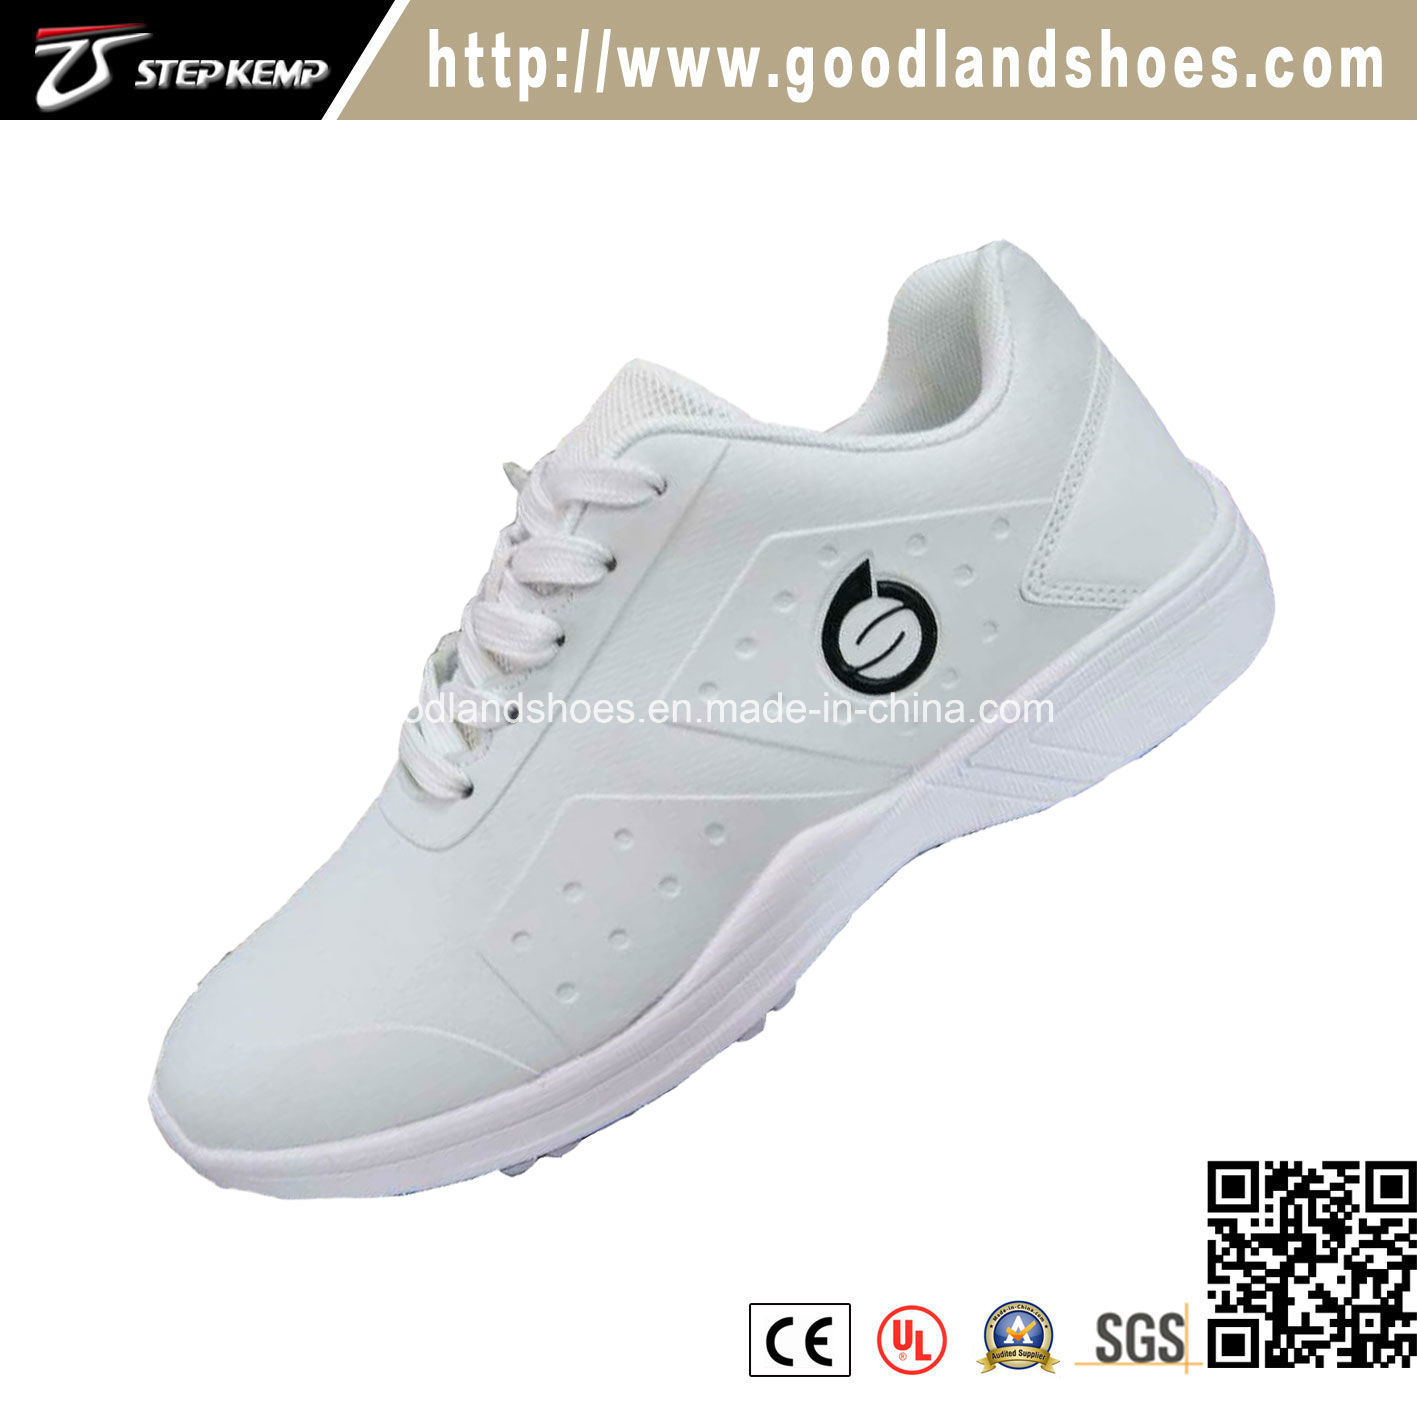 New Men's Lightweight Casual White Golf Shoes 20219